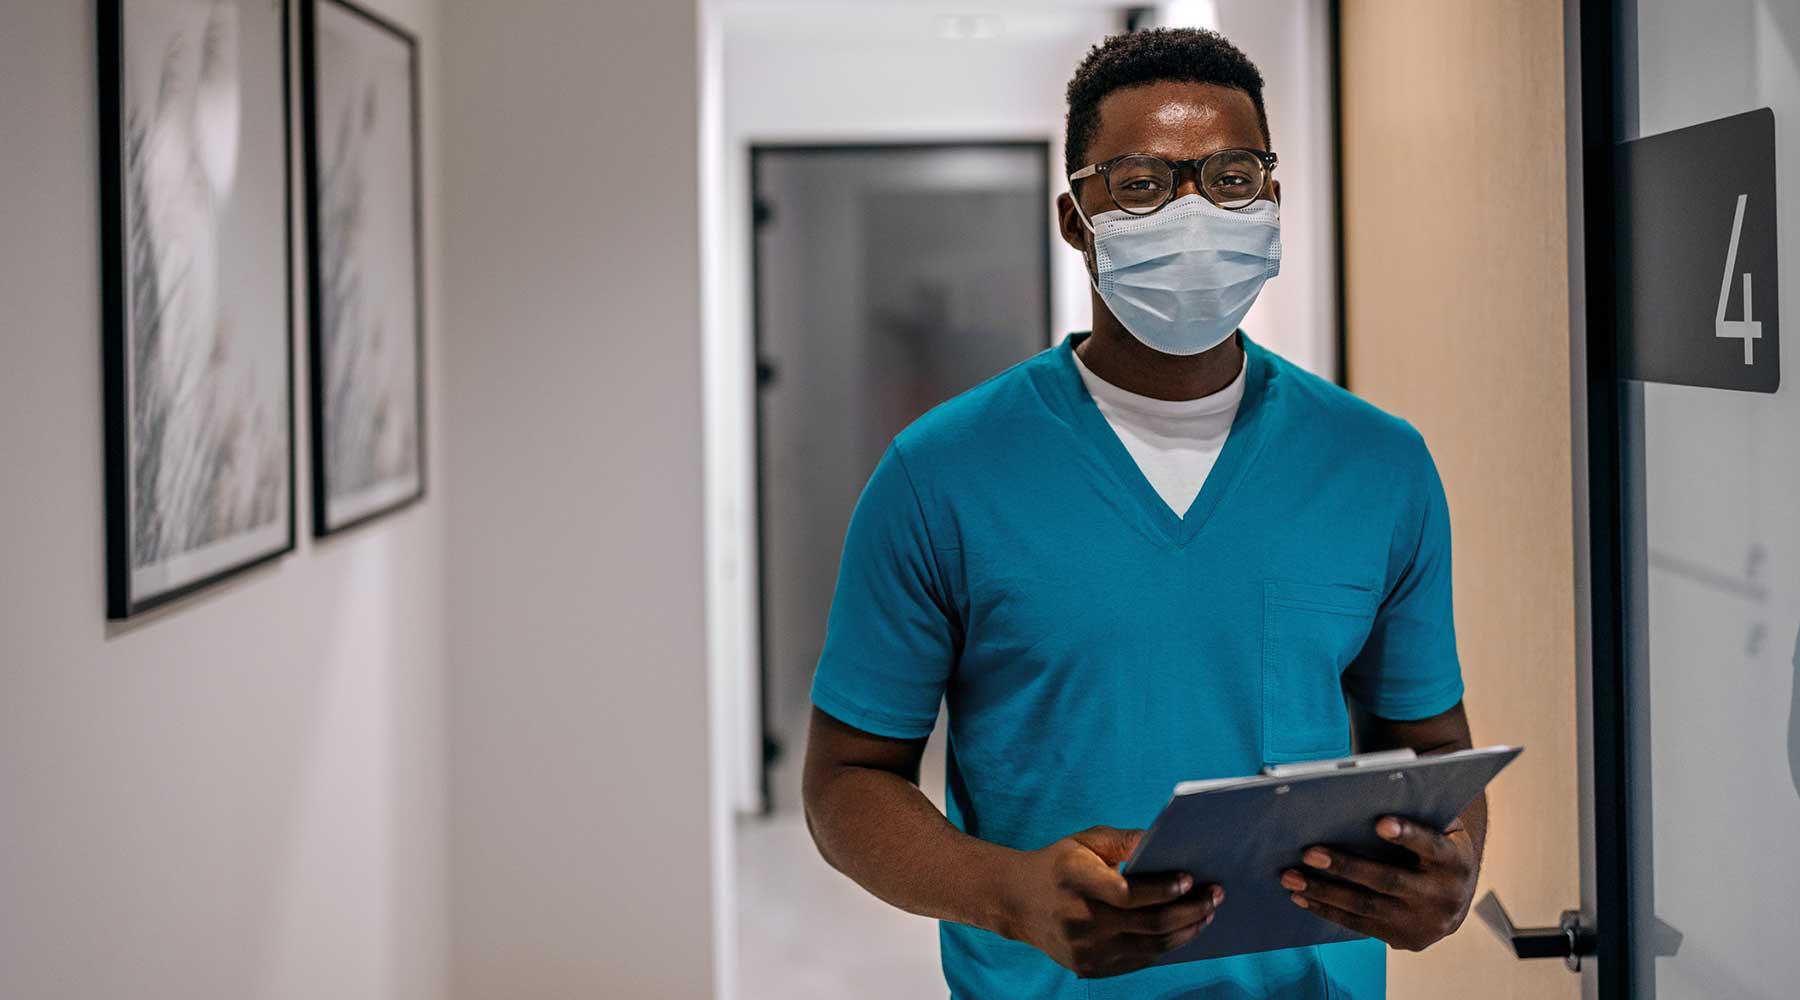 Male nurse practitioner in blue scrubs and face mask holding a clipboard in hospital hallway